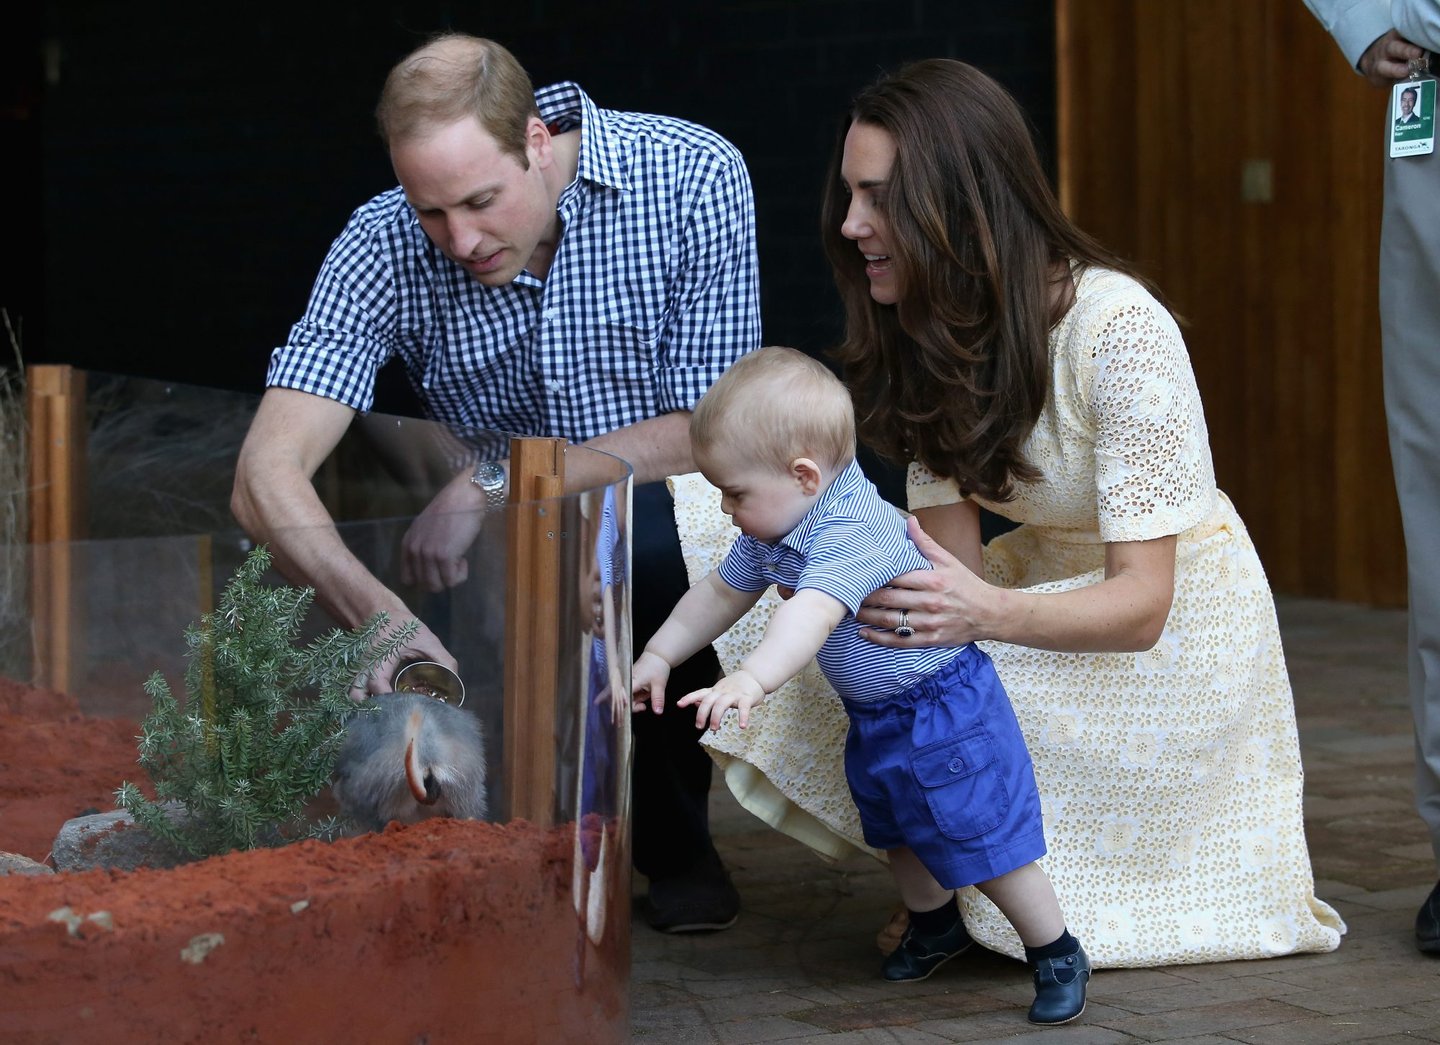 SYDNEY, AUSTRALIA - APRIL 20: Catherine, Duchess of Cambridge holds Prince George of Cambridge as Prince William, Duke of Cambridge looks on whilst meeting a Bilby called George at Taronga Zoo on April 20, 2014 in Sydney, Australia. The Duke and Duchess of Cambridge are on a three-week tour of Australia and New Zealand, the first official trip overseas with their son, Prince George of Cambridge. (Photo by Chris Jackson/Getty Images)